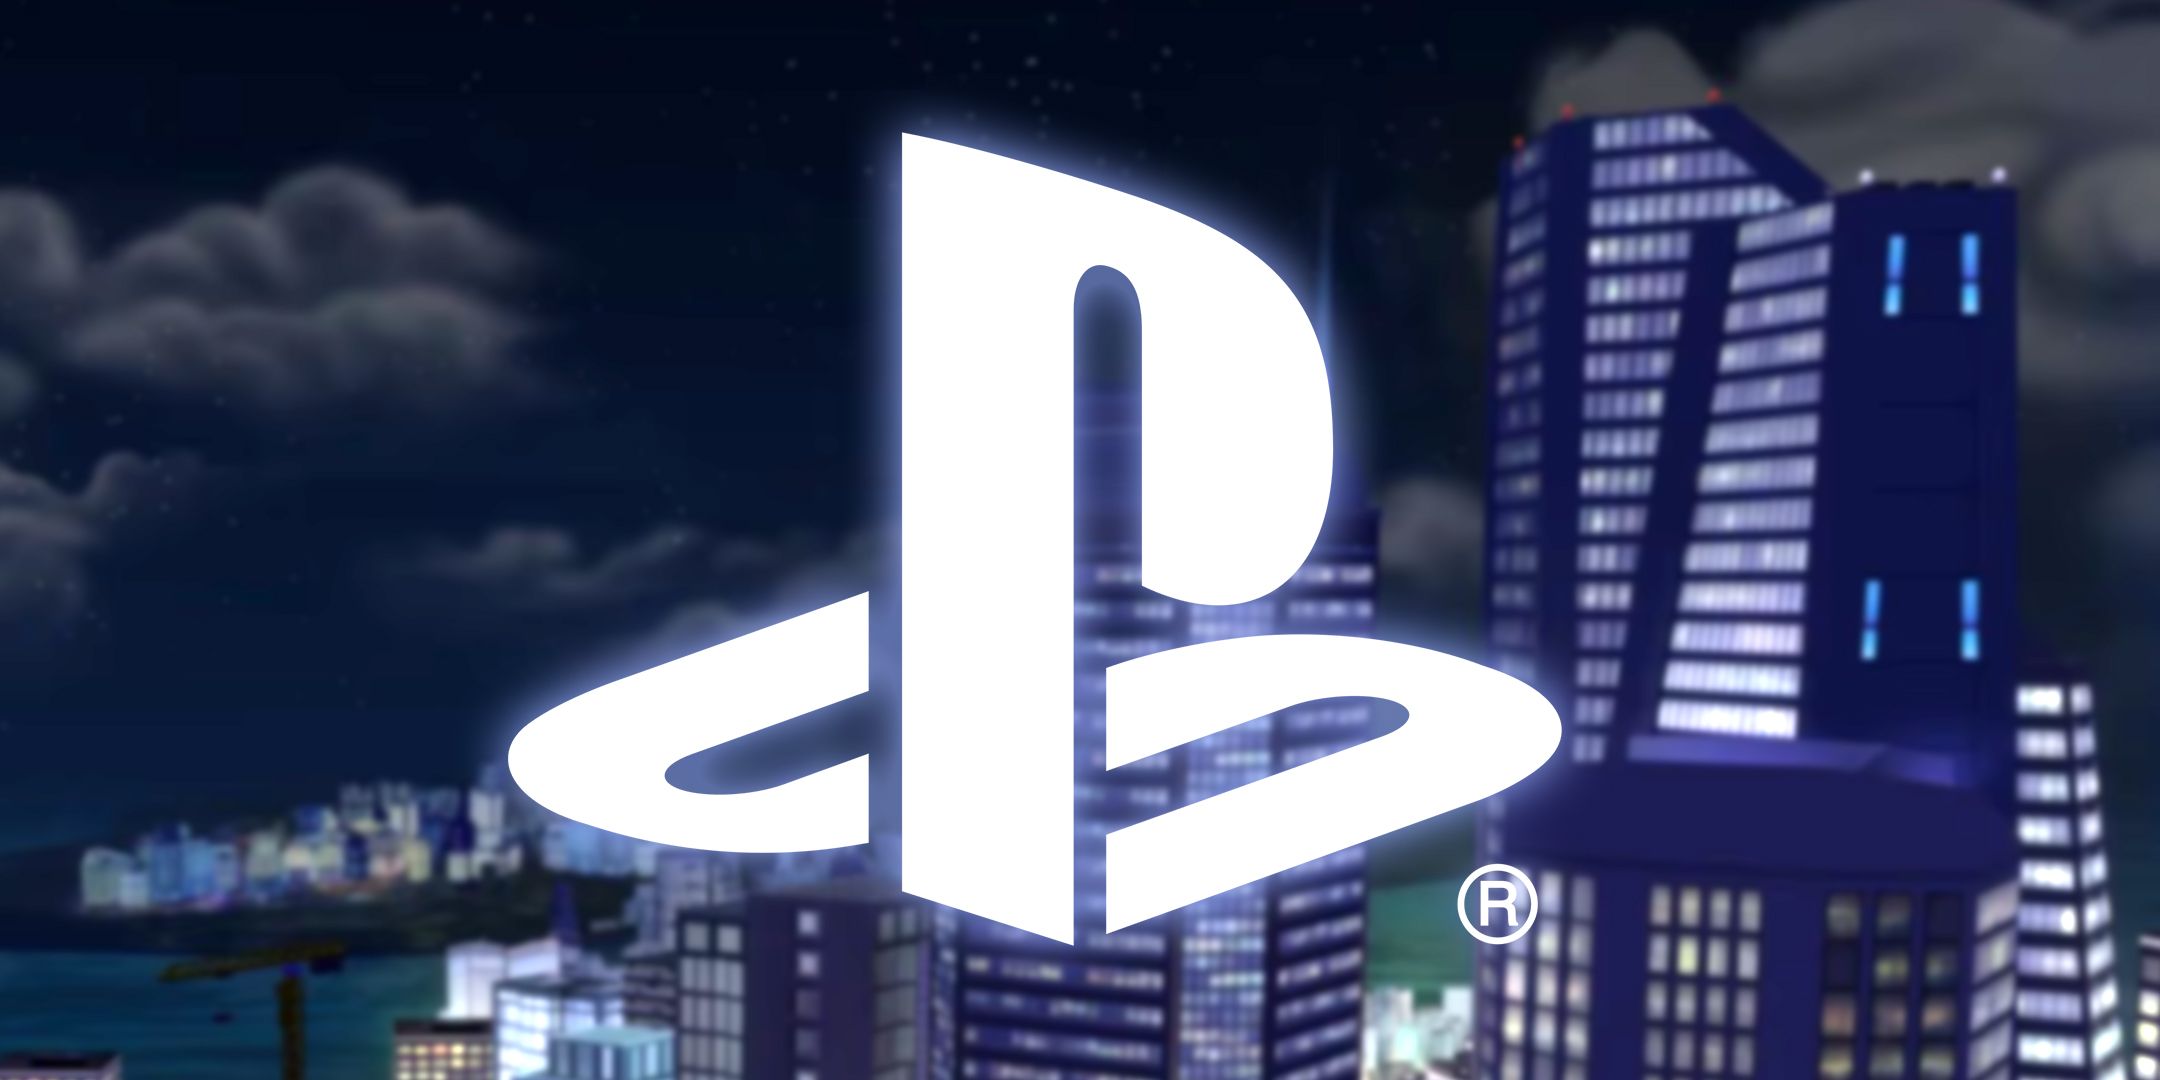 PS Logo in front of a cityscape from The Sims 4 City Living.